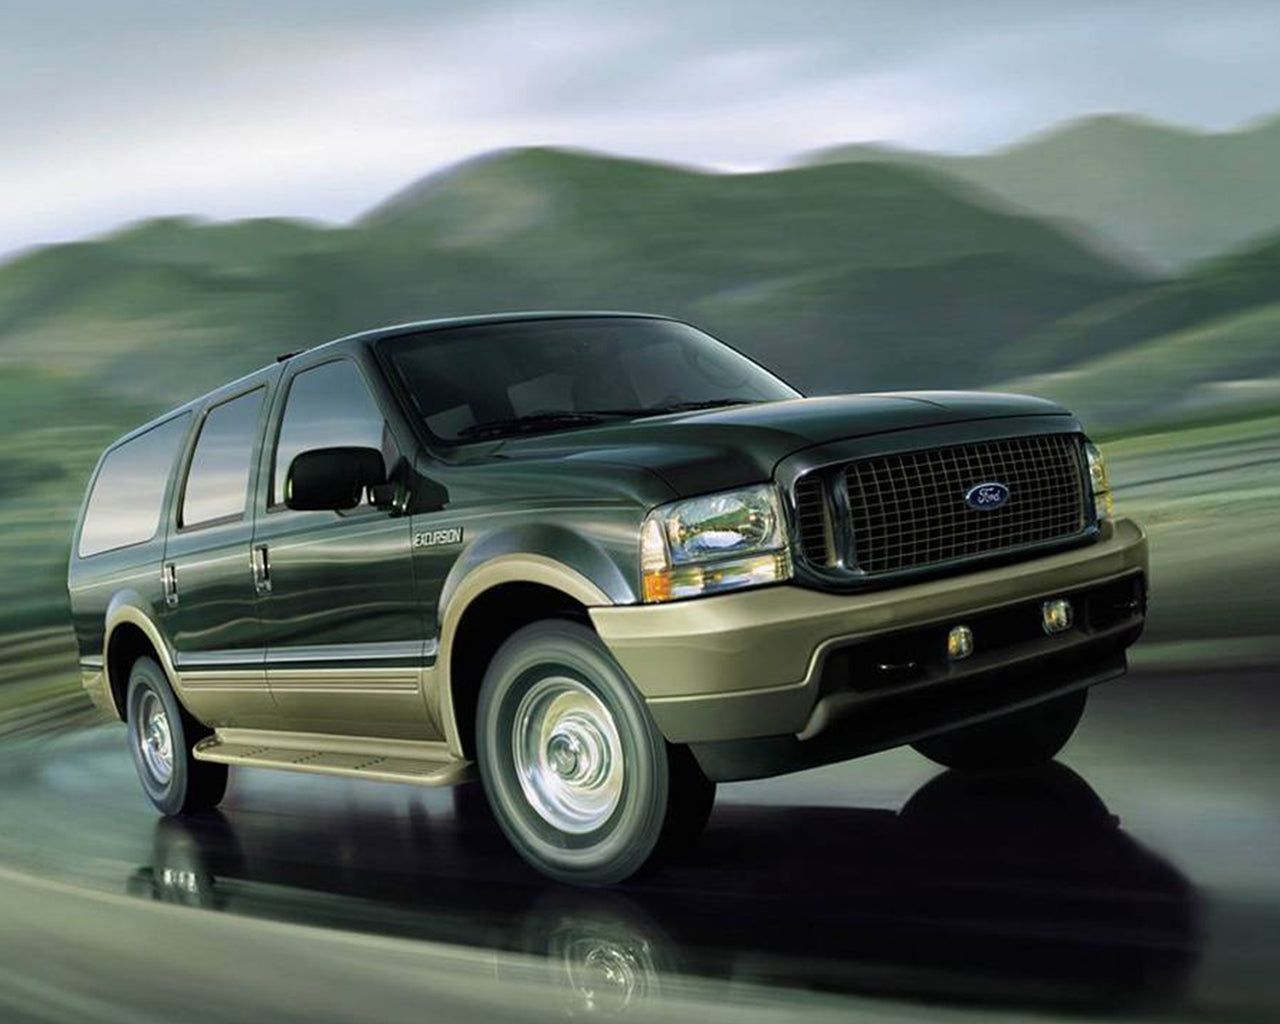 Two tone black and beige Ford Excursion driving fast and taking a turn with blurred background